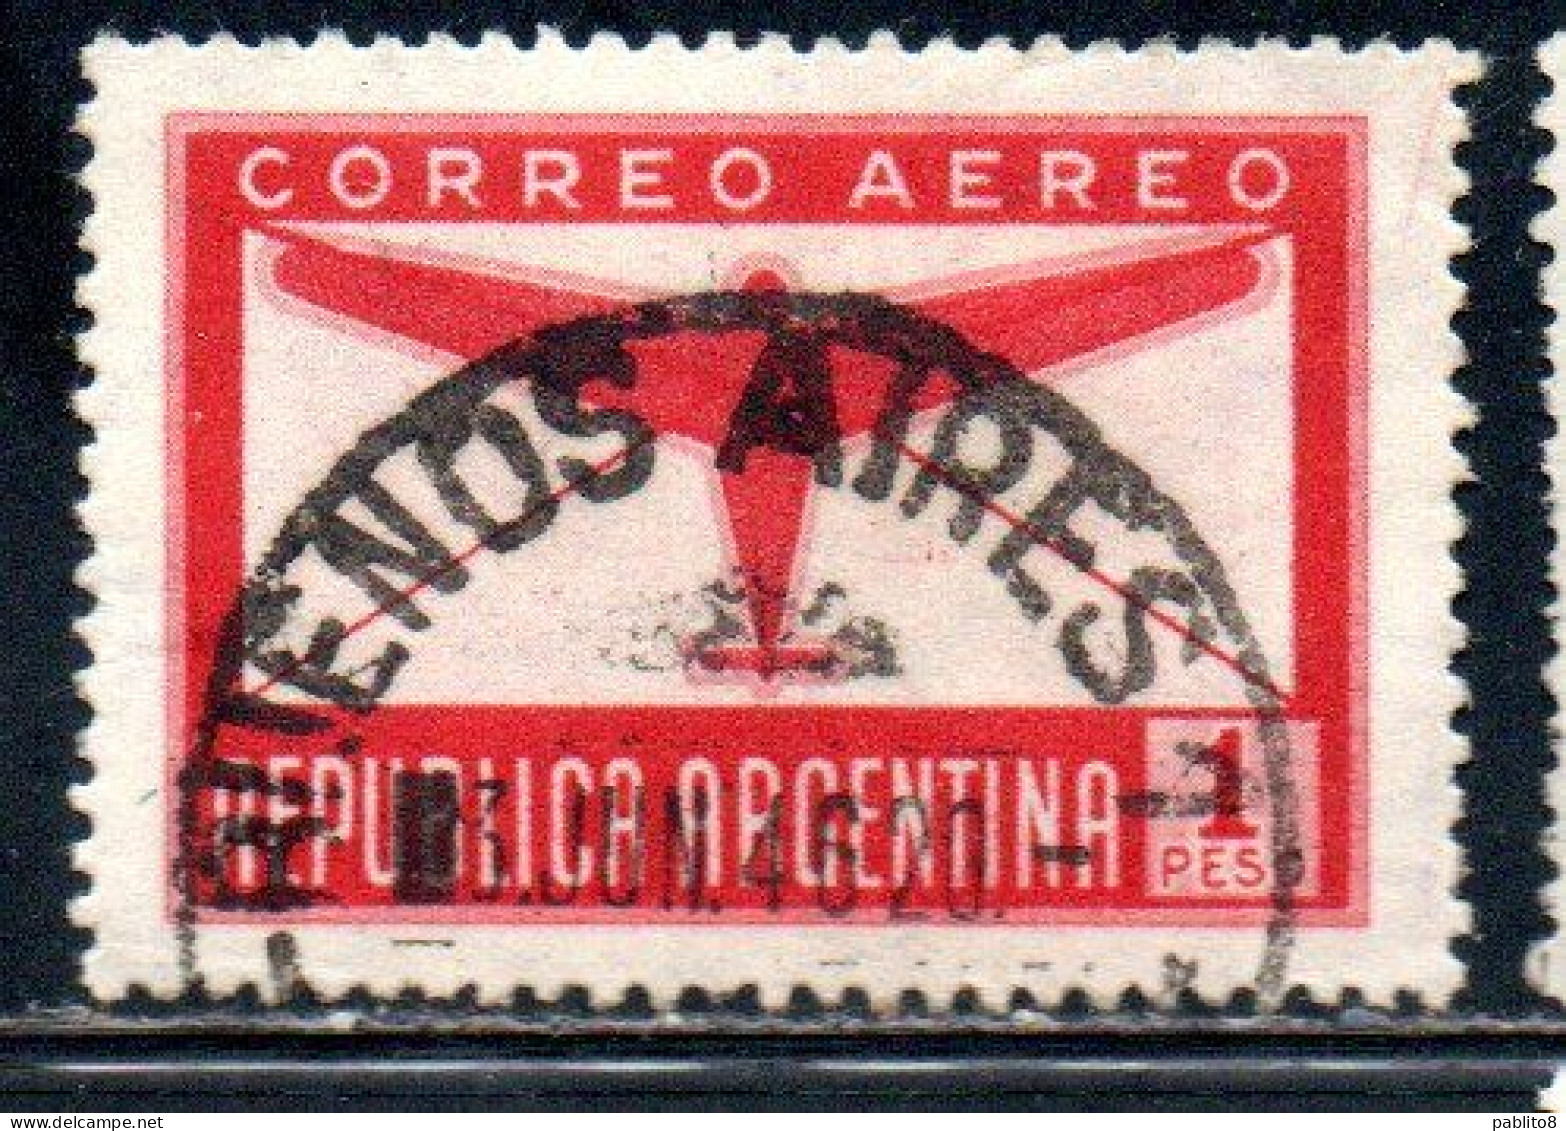 ARGENTINA 1940  AIR POST MAIL CORREO AEREO AIRMAIL PLANE AND LETTER 1p USED USADO OBLITERE' - Airmail